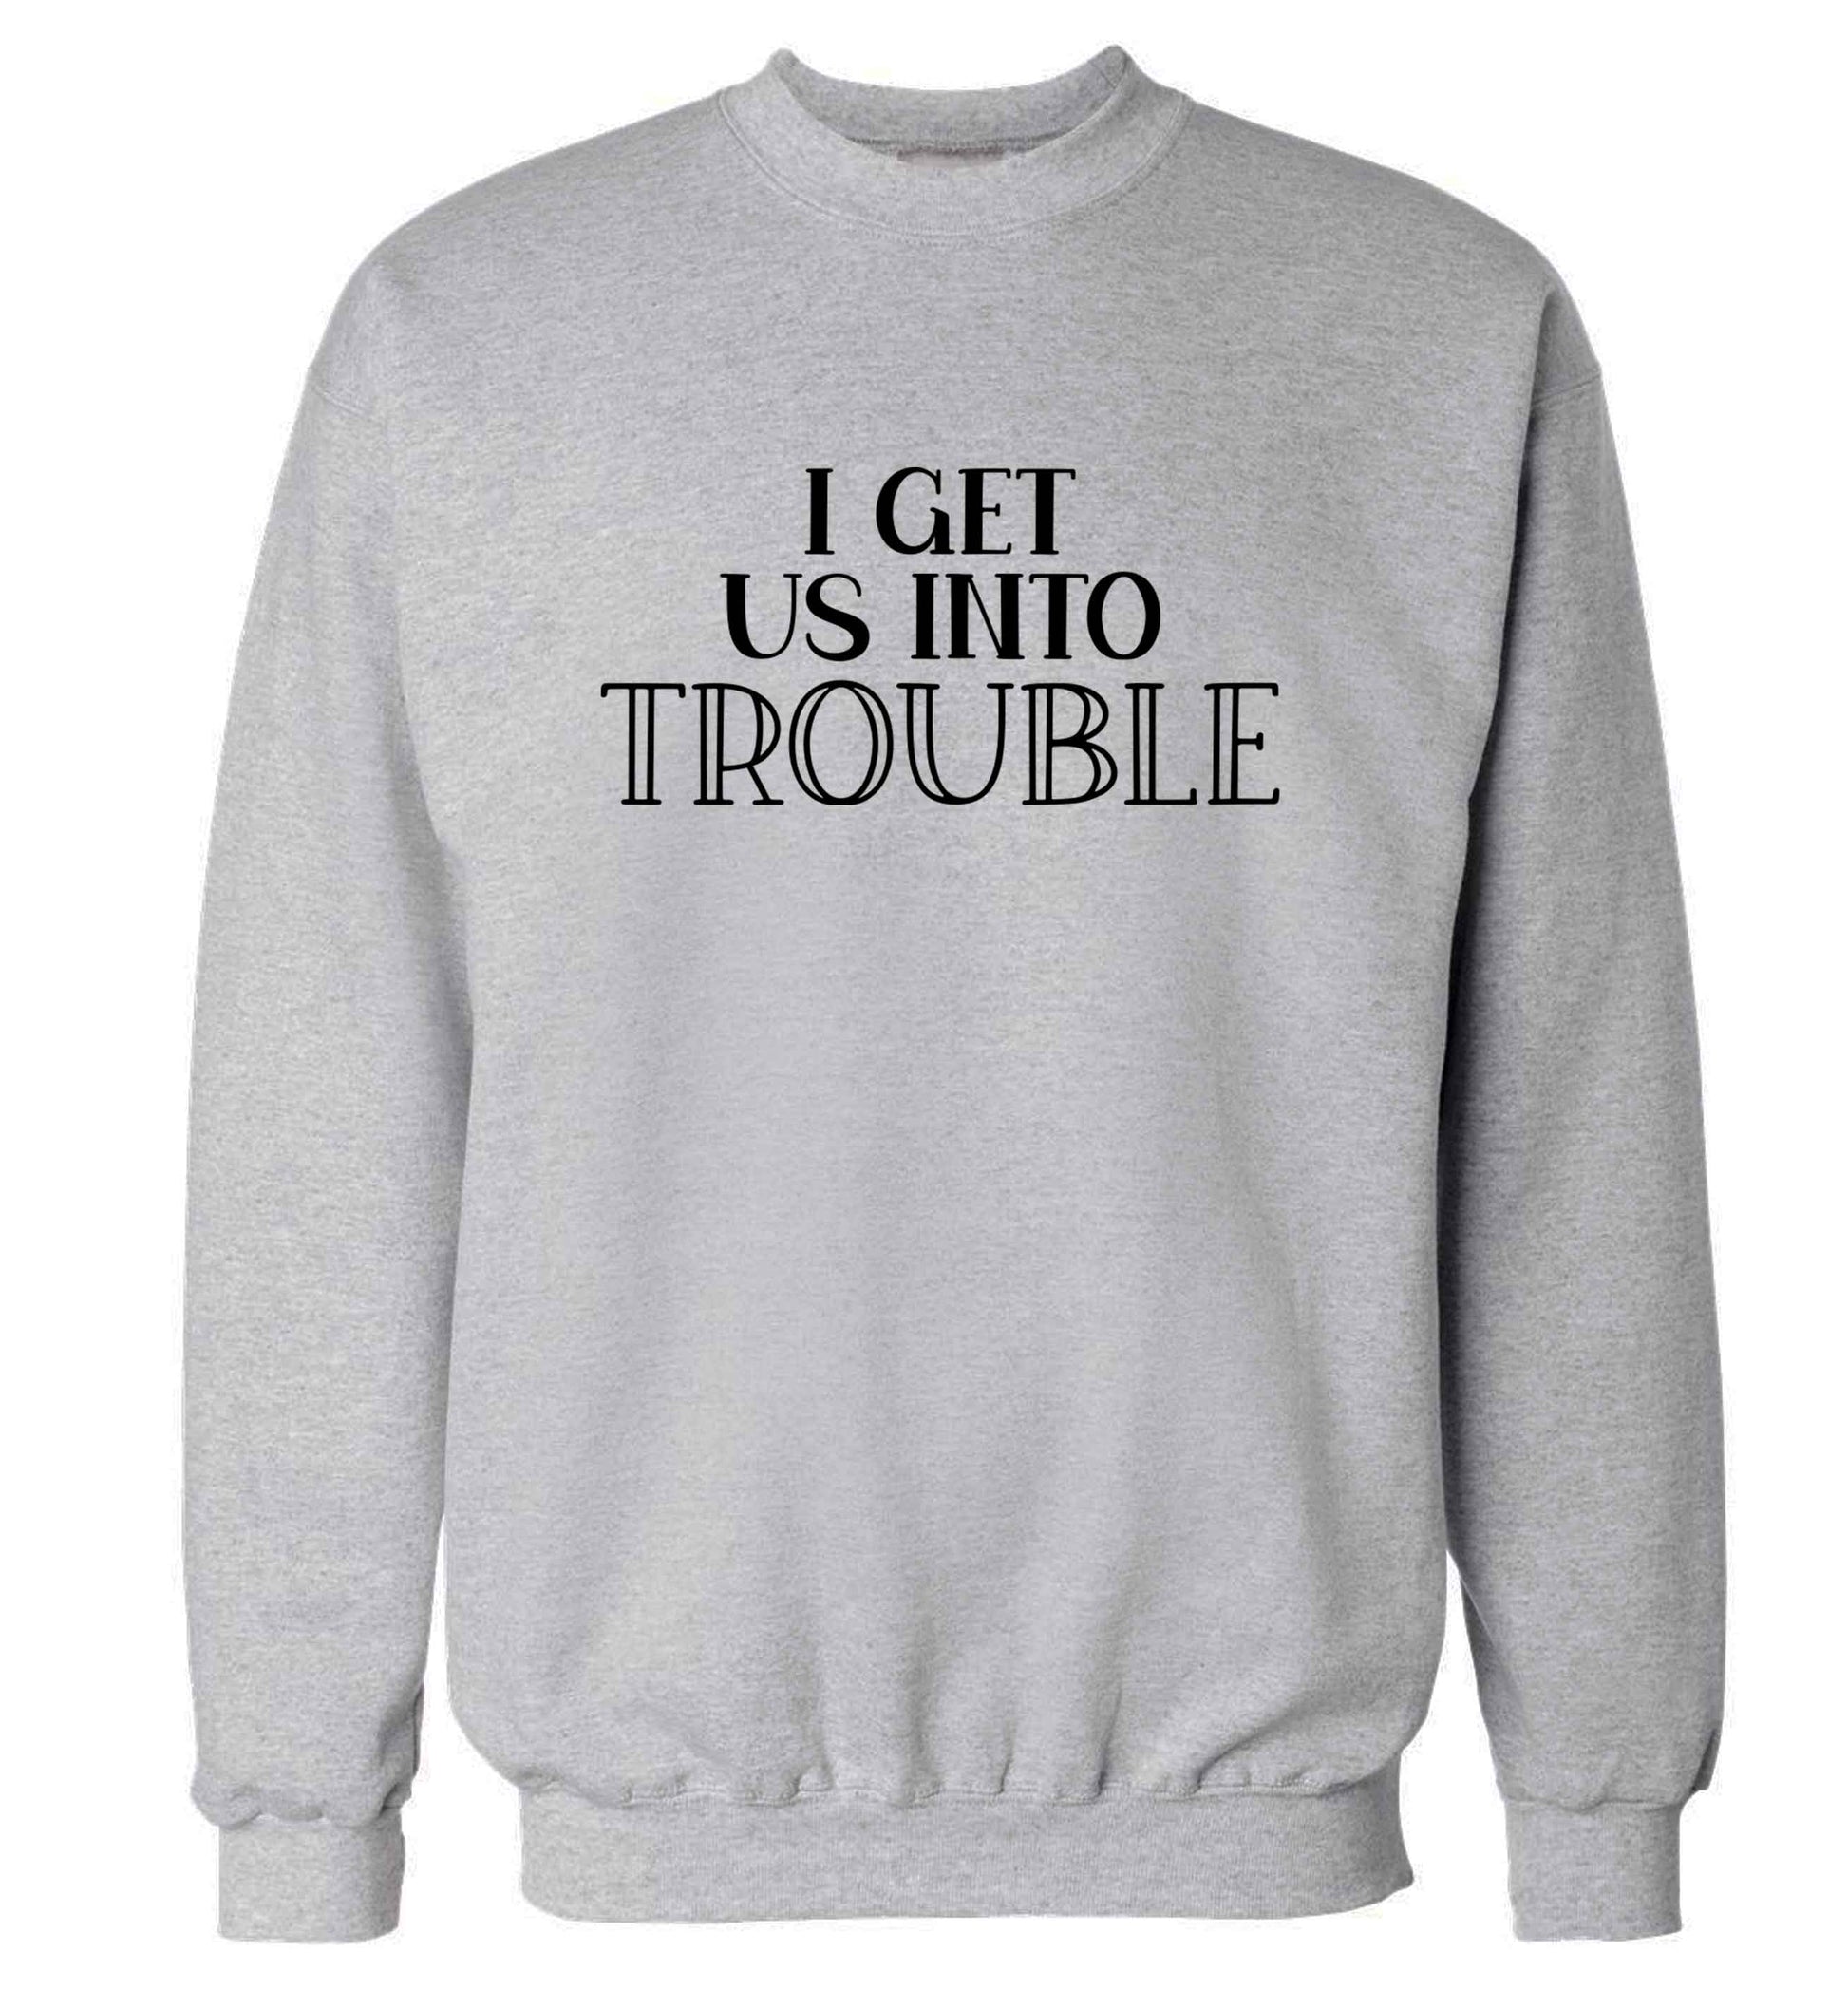 I get us into trouble adult's unisex grey sweater 2XL